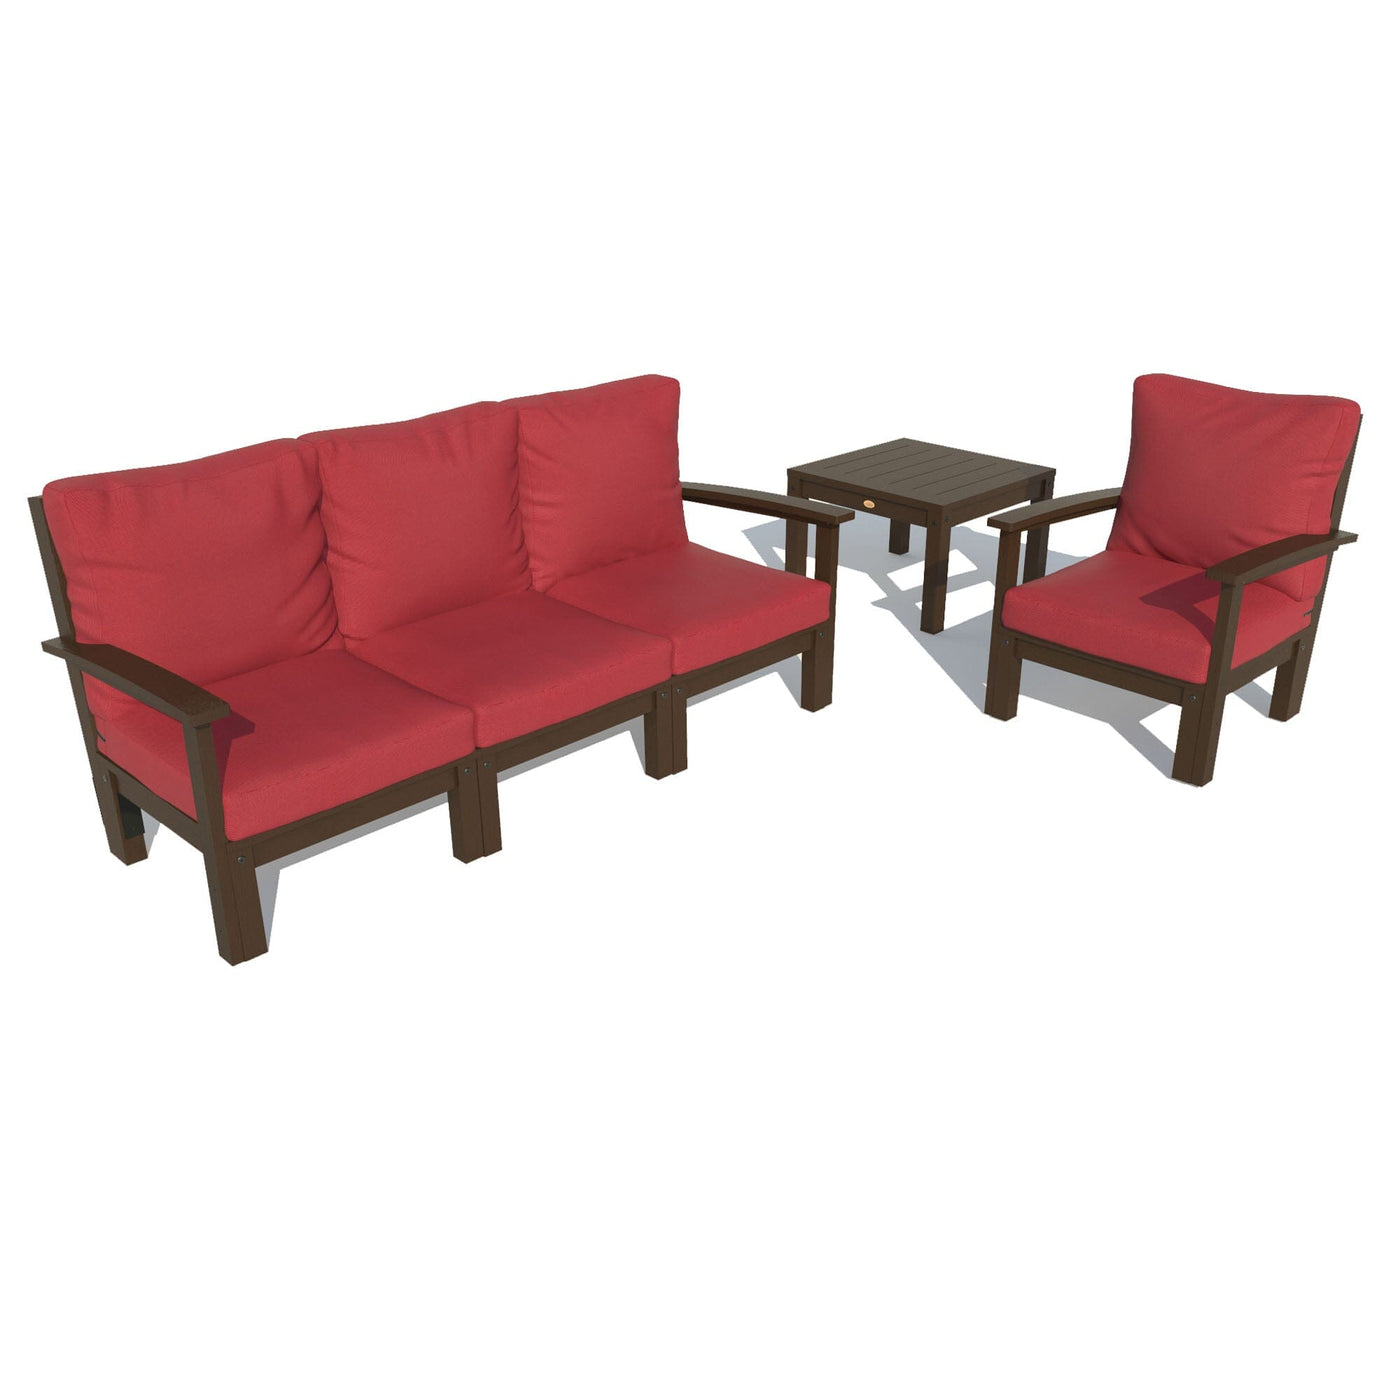 Bespoke Deep Seating: Sofa, Chair, and Side Table Deep Seating Highwood USA Firecracker Red Weathered Acorn 